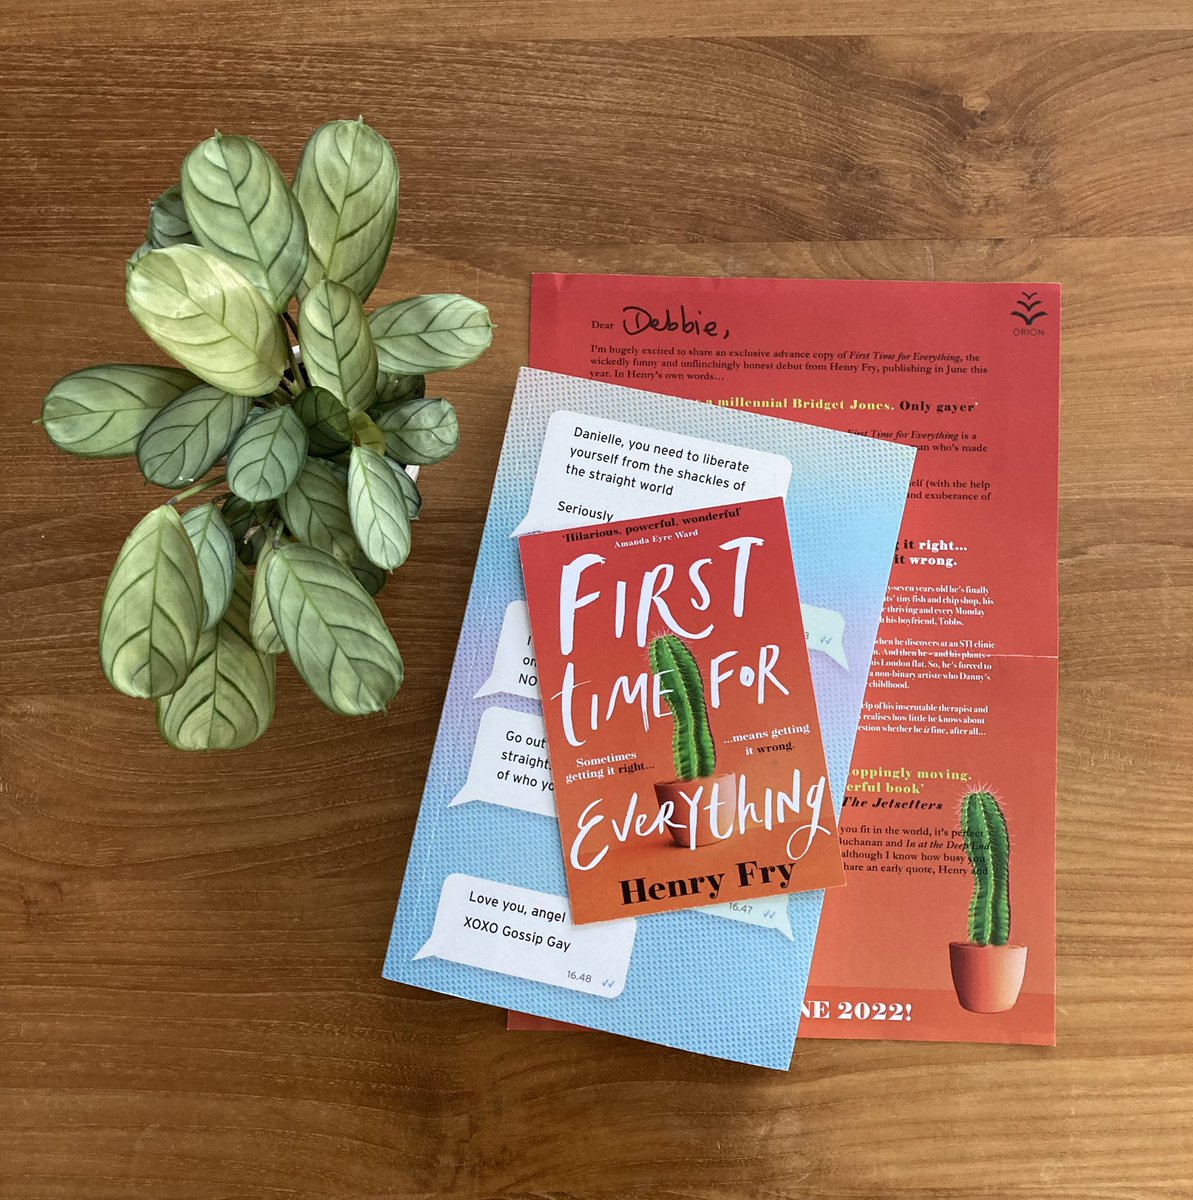 Thanks so much @Charlo_Murs @orionbooks for my proof copy of #FirstTimeForEverything by @HenryCFry - can’t wait to read this debut novel! 

#BookTwitter #booktwt #bookbloggers #Giveaway #bookmail